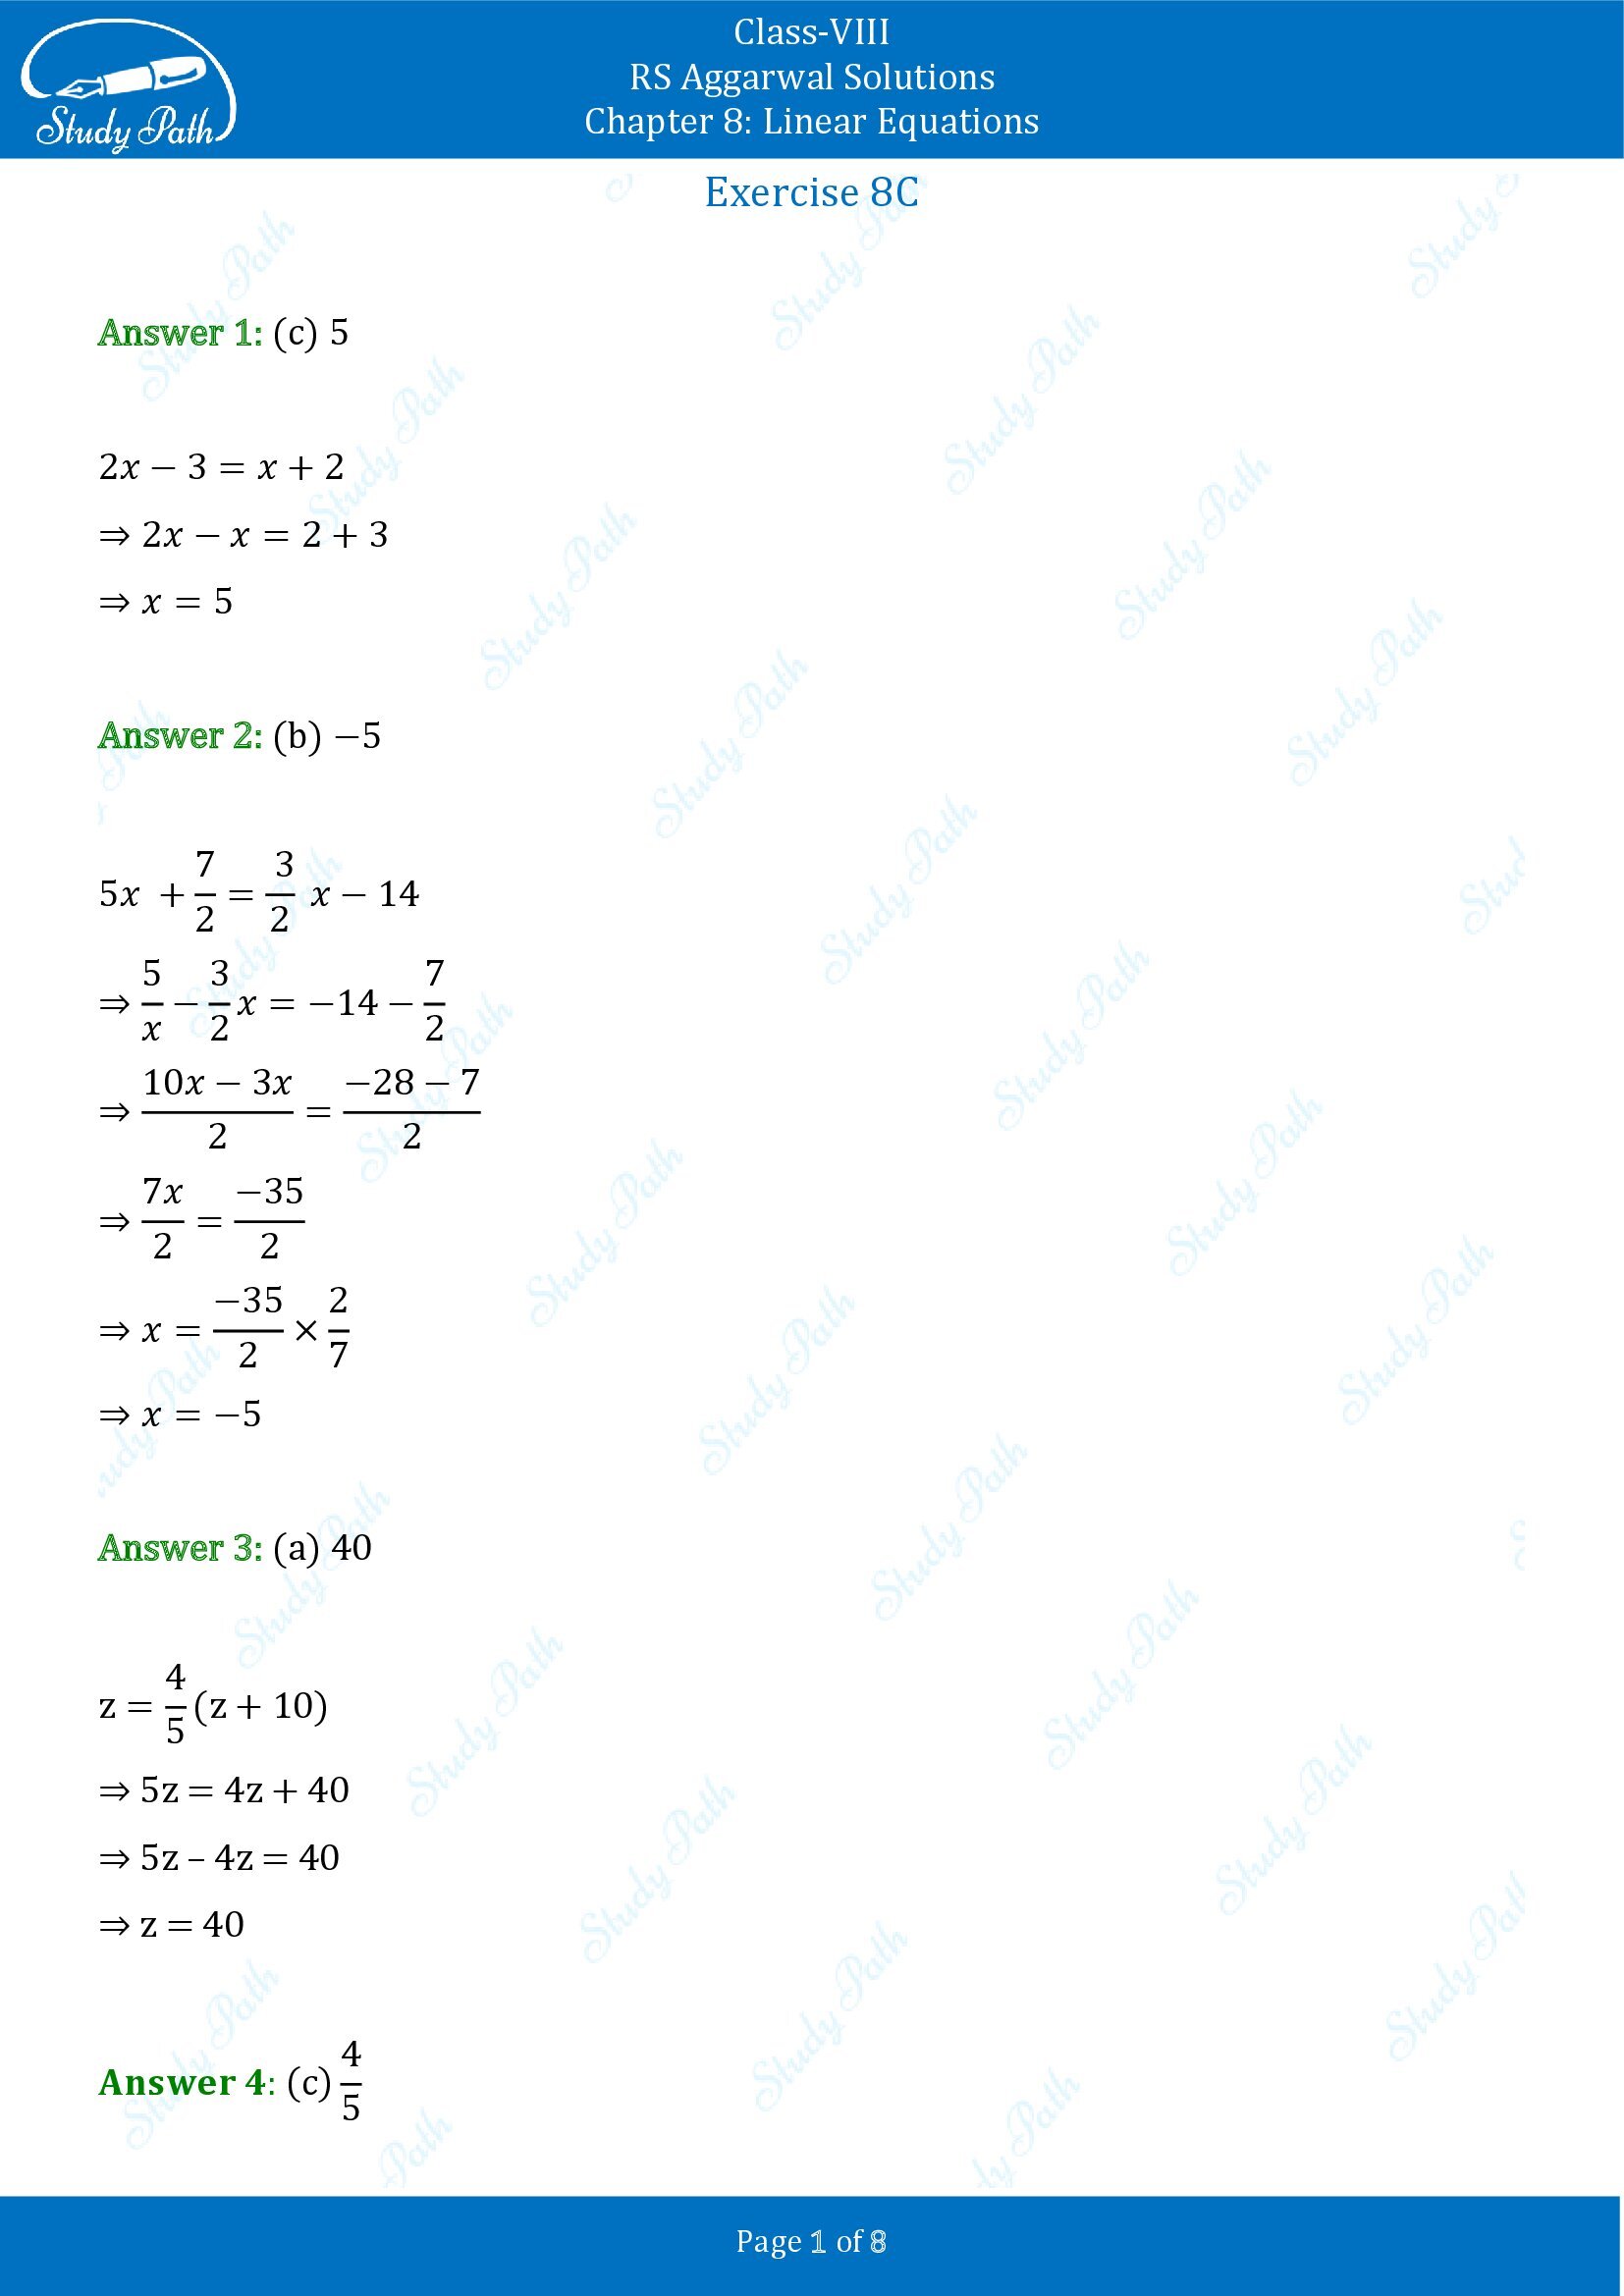 RS Aggarwal Solutions Class 8 Chapter 8 Linear Equations Exercise 8C MCQs 00001